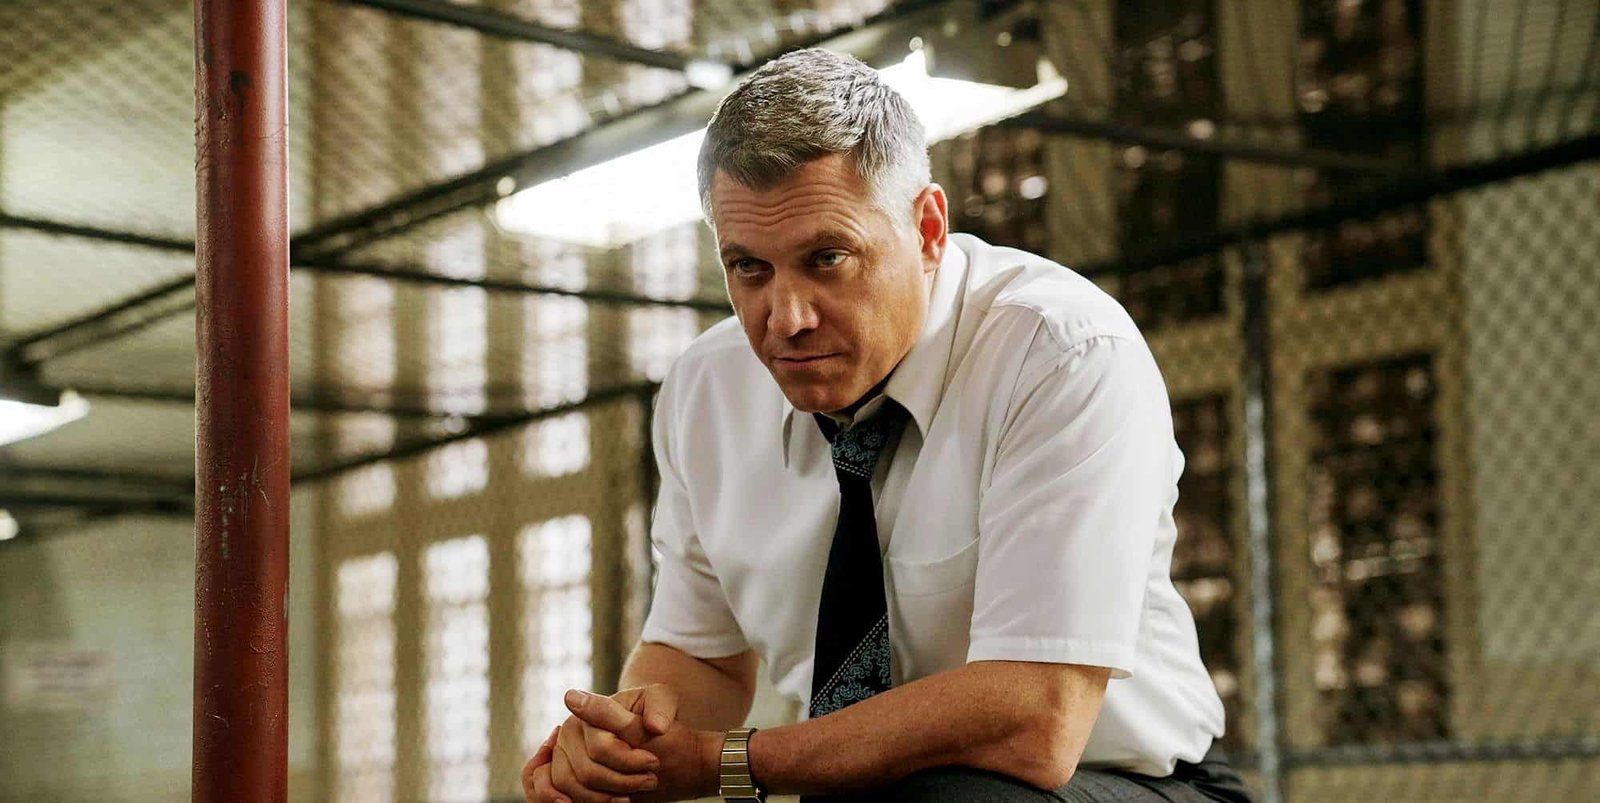 Cast of Mindhunter - Holt McCallany as Bill Tench